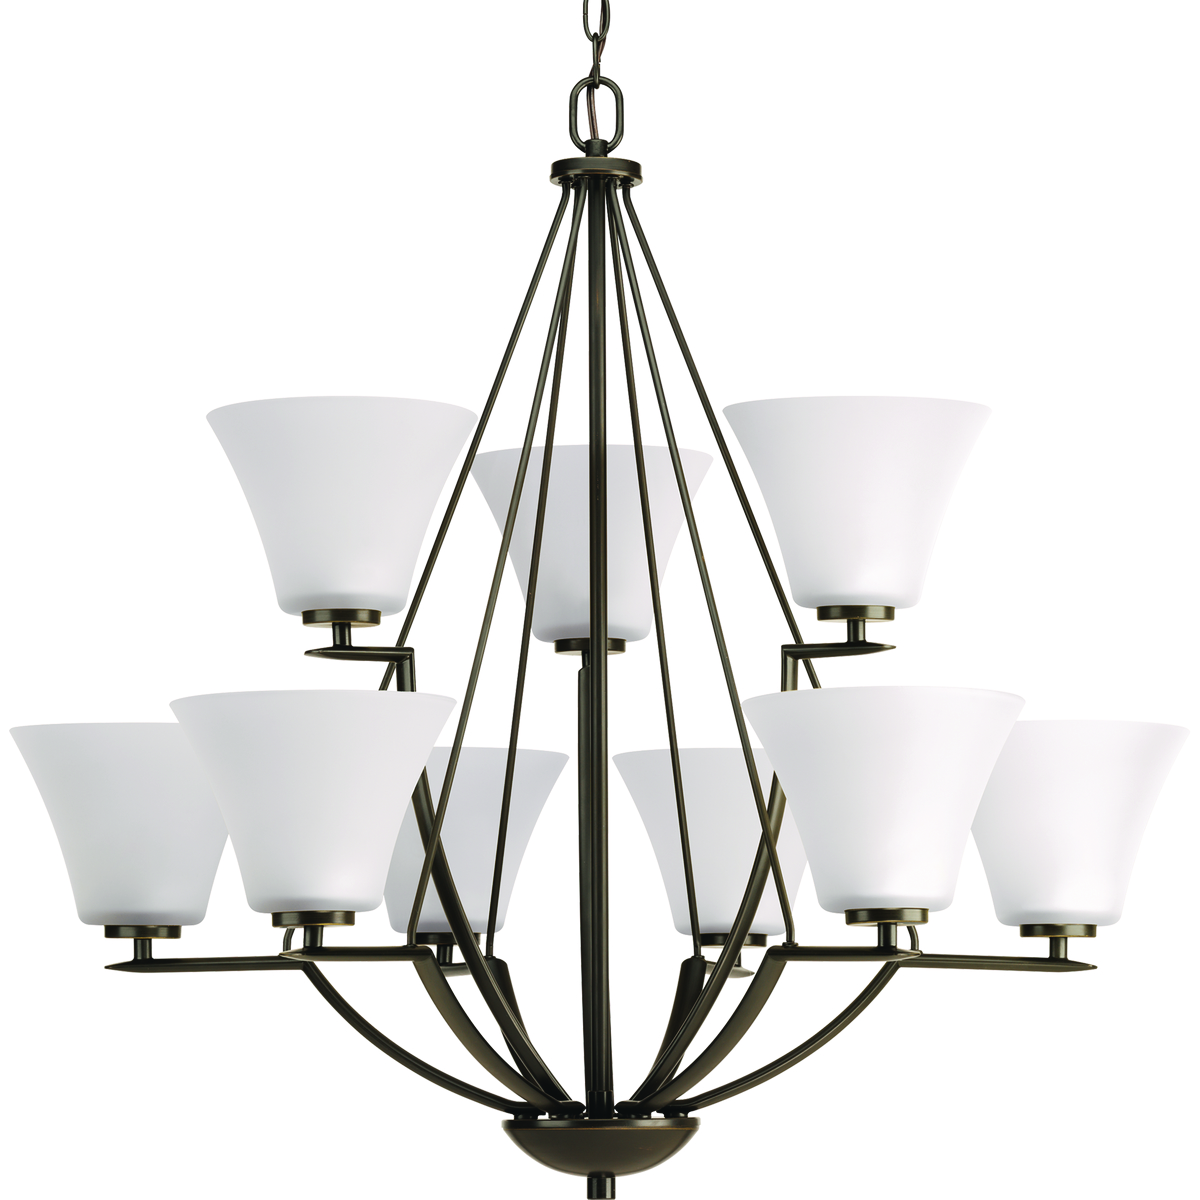 Nine-light, two-tier chandelier with white etched glass from the Bravo collection. Linear elements stream throughout the fixture to compose a relaxed but exotic ambiance. Generously scaled glass shades add distinction against the Antique Bronze finish and provide pleasing illumination to your room. Bravo possesses a smart simplicity to complement today's home entirely with confidence and style.